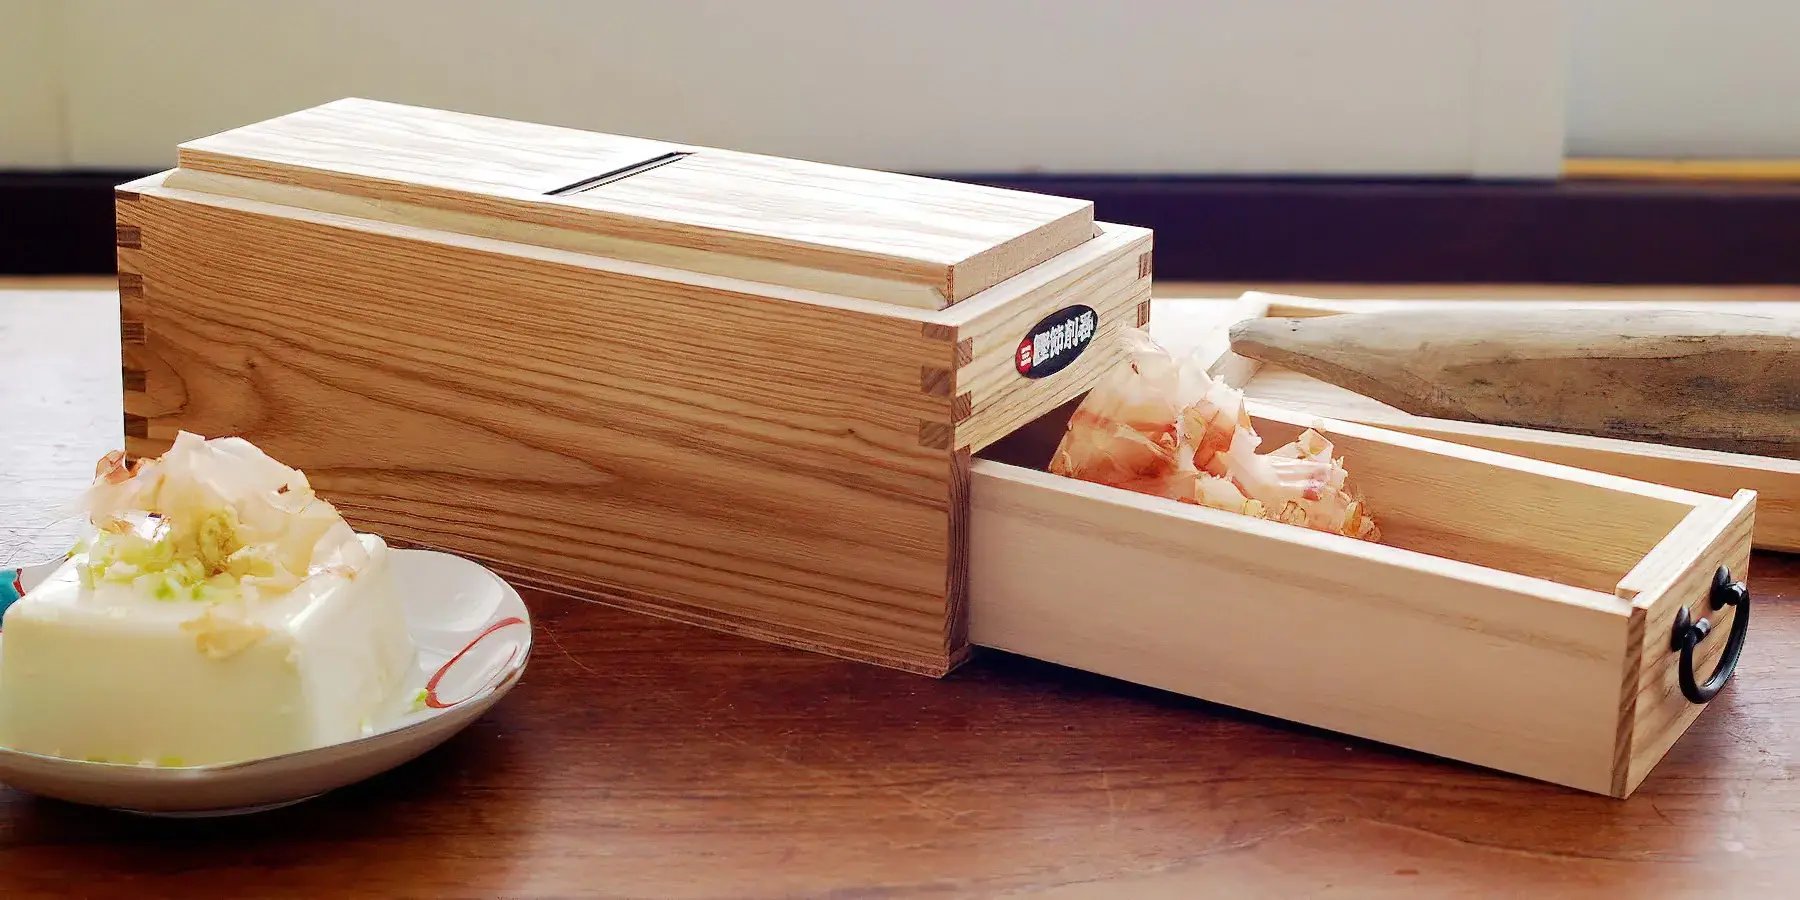 Discover our great selection of Bonito Shaver Box at Globalkitchen Japan.